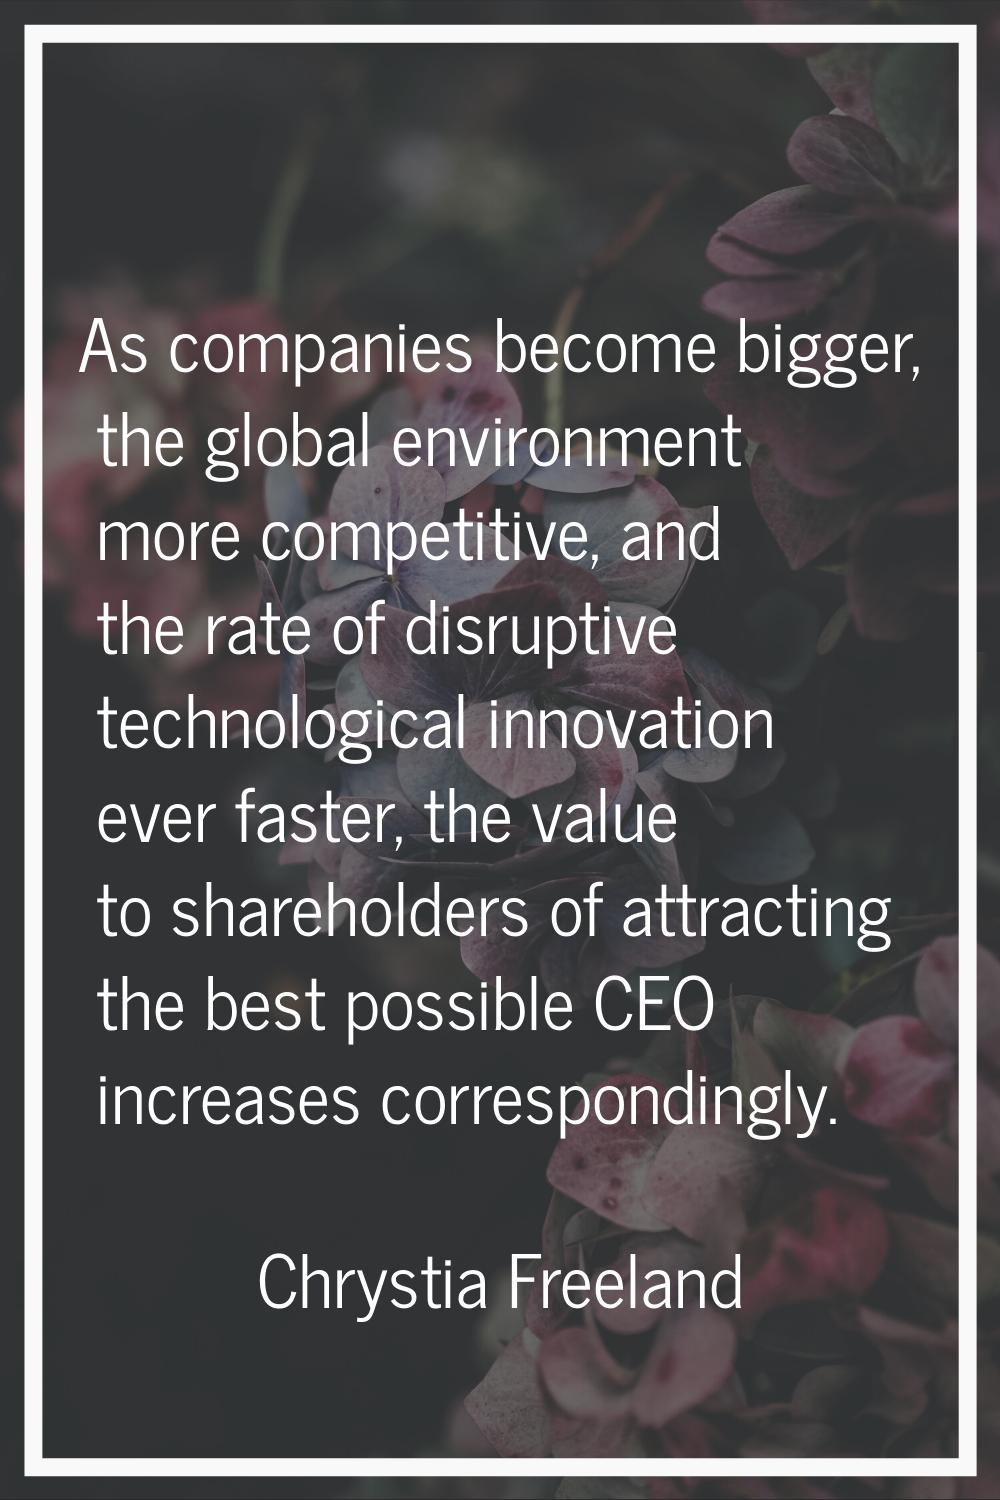 As companies become bigger, the global environment more competitive, and the rate of disruptive tec